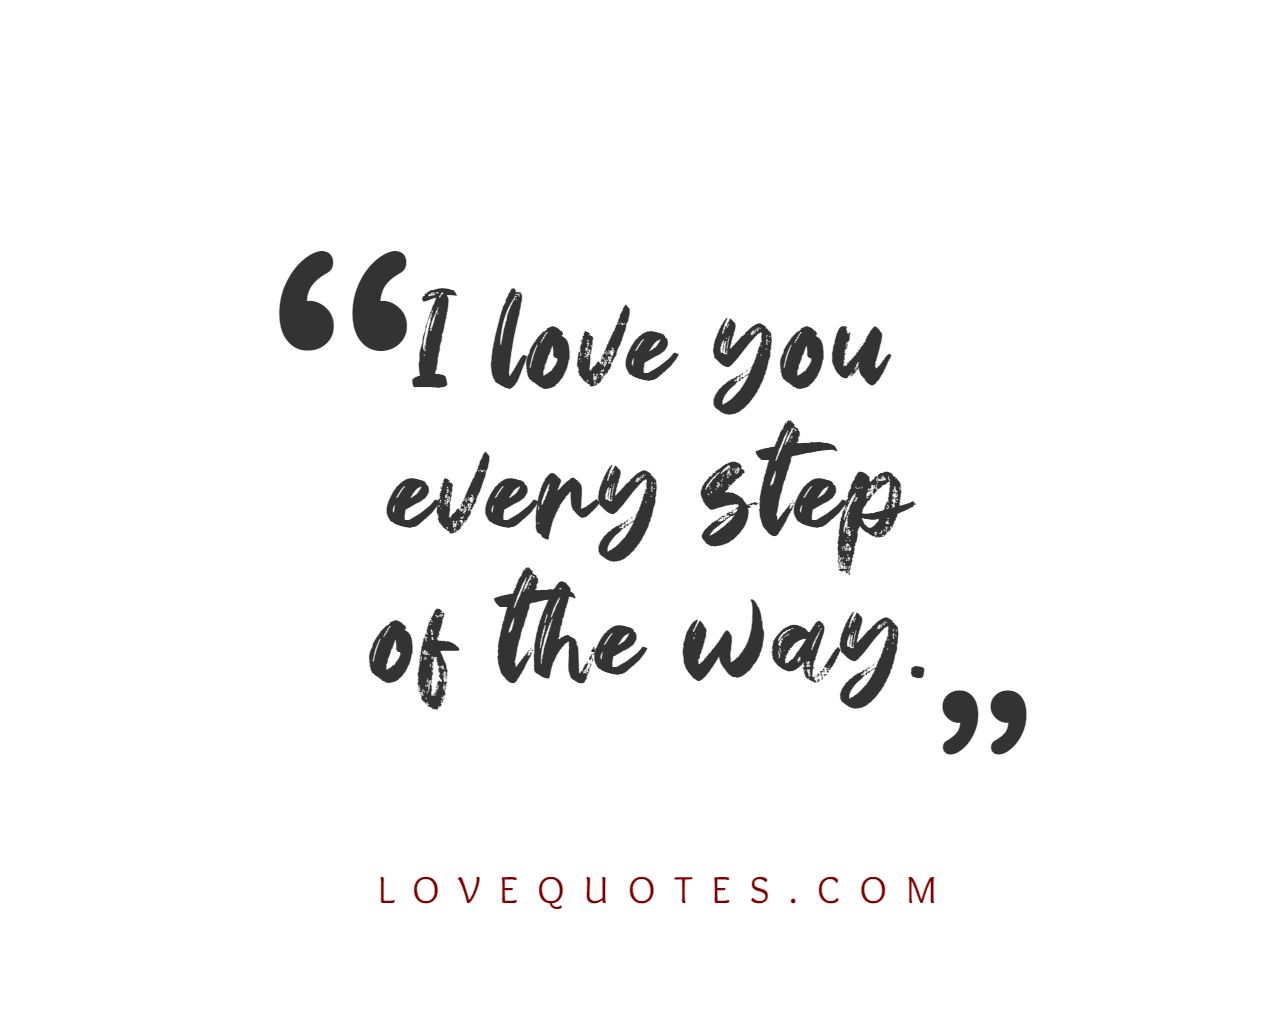 Every Step Of The Way